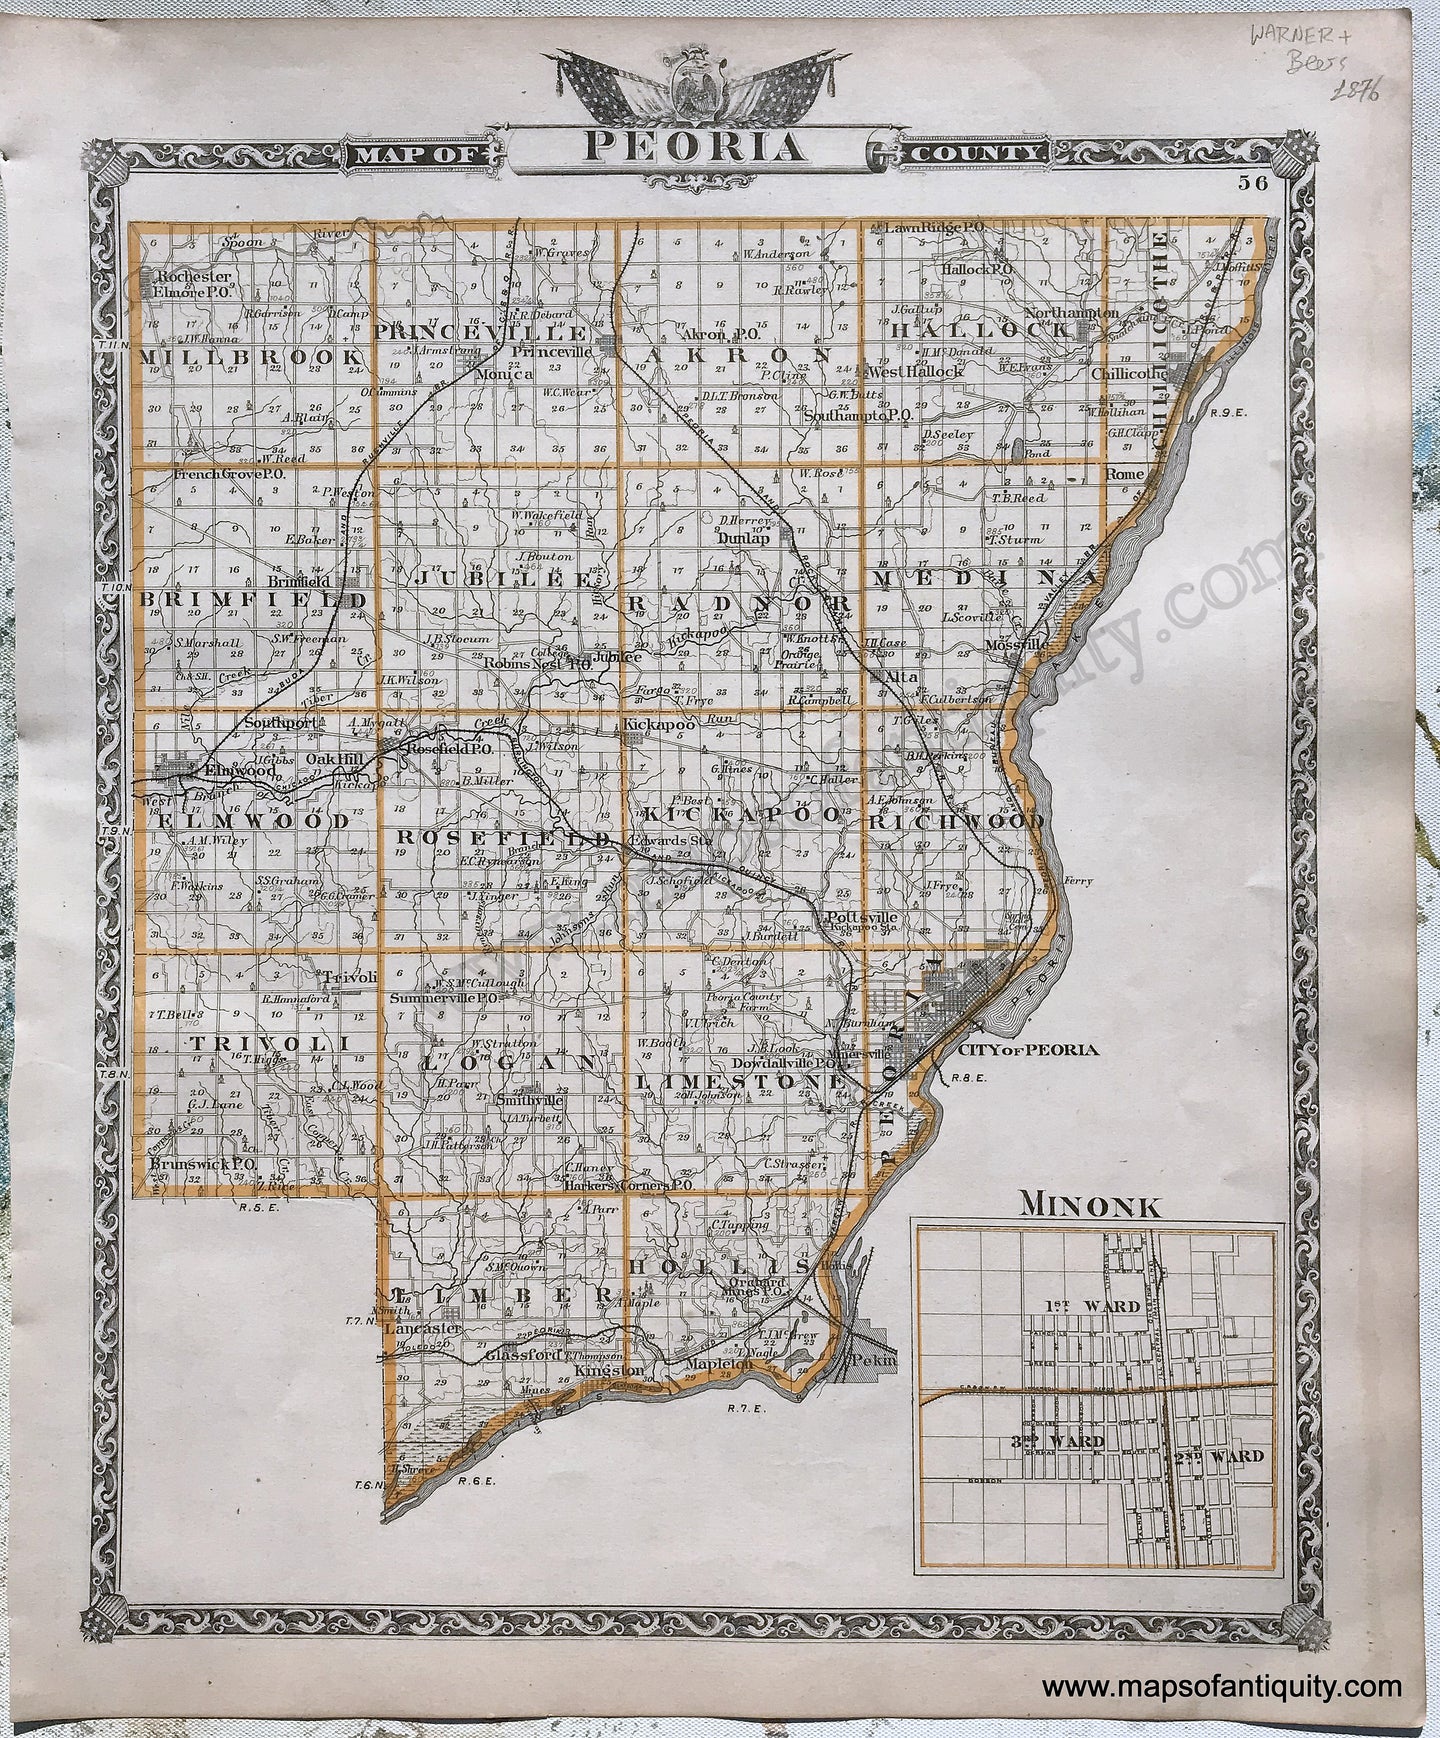 Antique-Hand-Colored-Map-Peoria-County;-verso:-Woodford-County-Illinois-1876-Warner-&-Beers-/-Union-Atlas-Co.-Midwest-1800s-19th-century-Maps-of-Antiquity